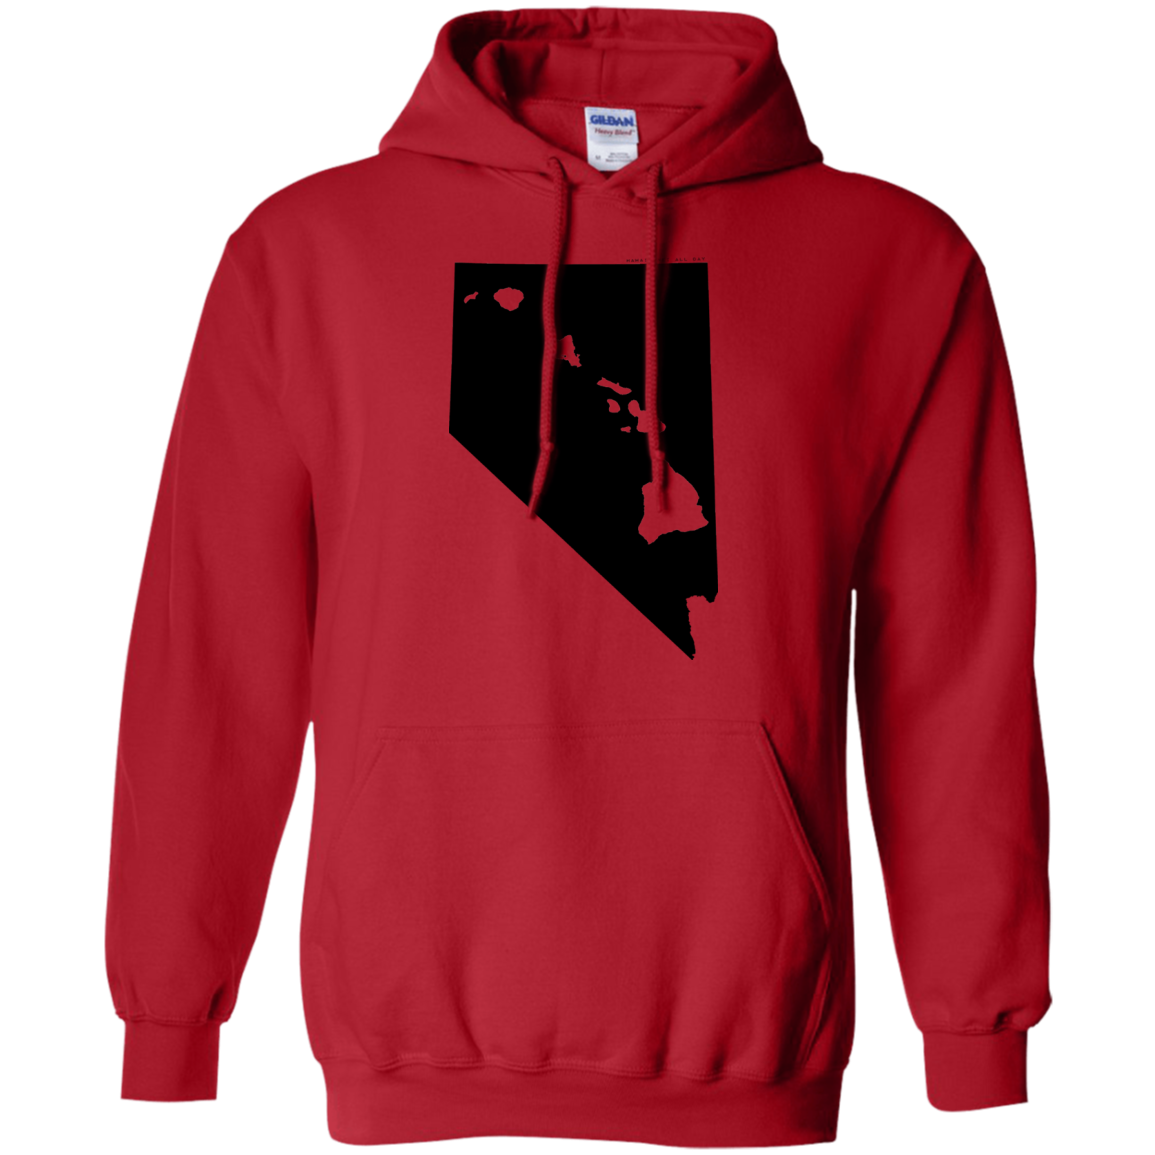 Living in Nevada with Hawaii Roots Pullover Hoodie 8 oz., Sweatshirts, Hawaii Nei All Day